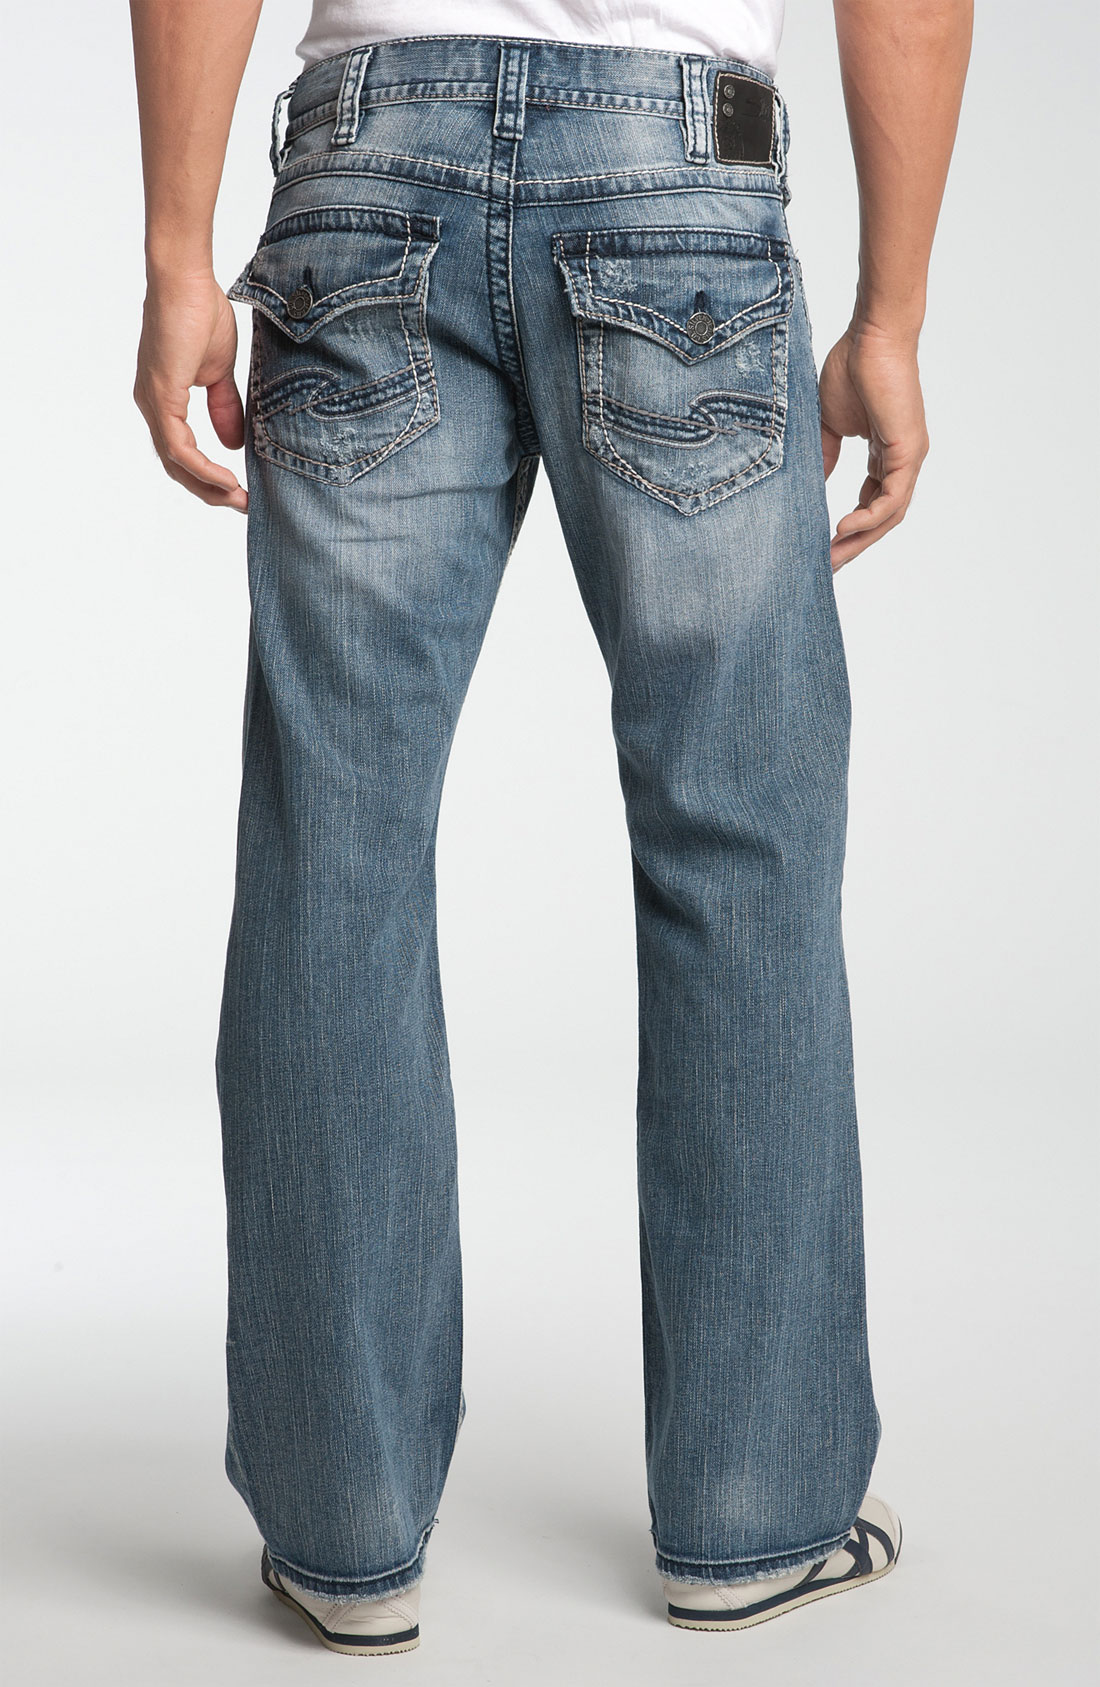 silver-jeans-co-indigo-zac-relaxed-straight-leg-jeans-product-2-3032916-834521585.jpeg